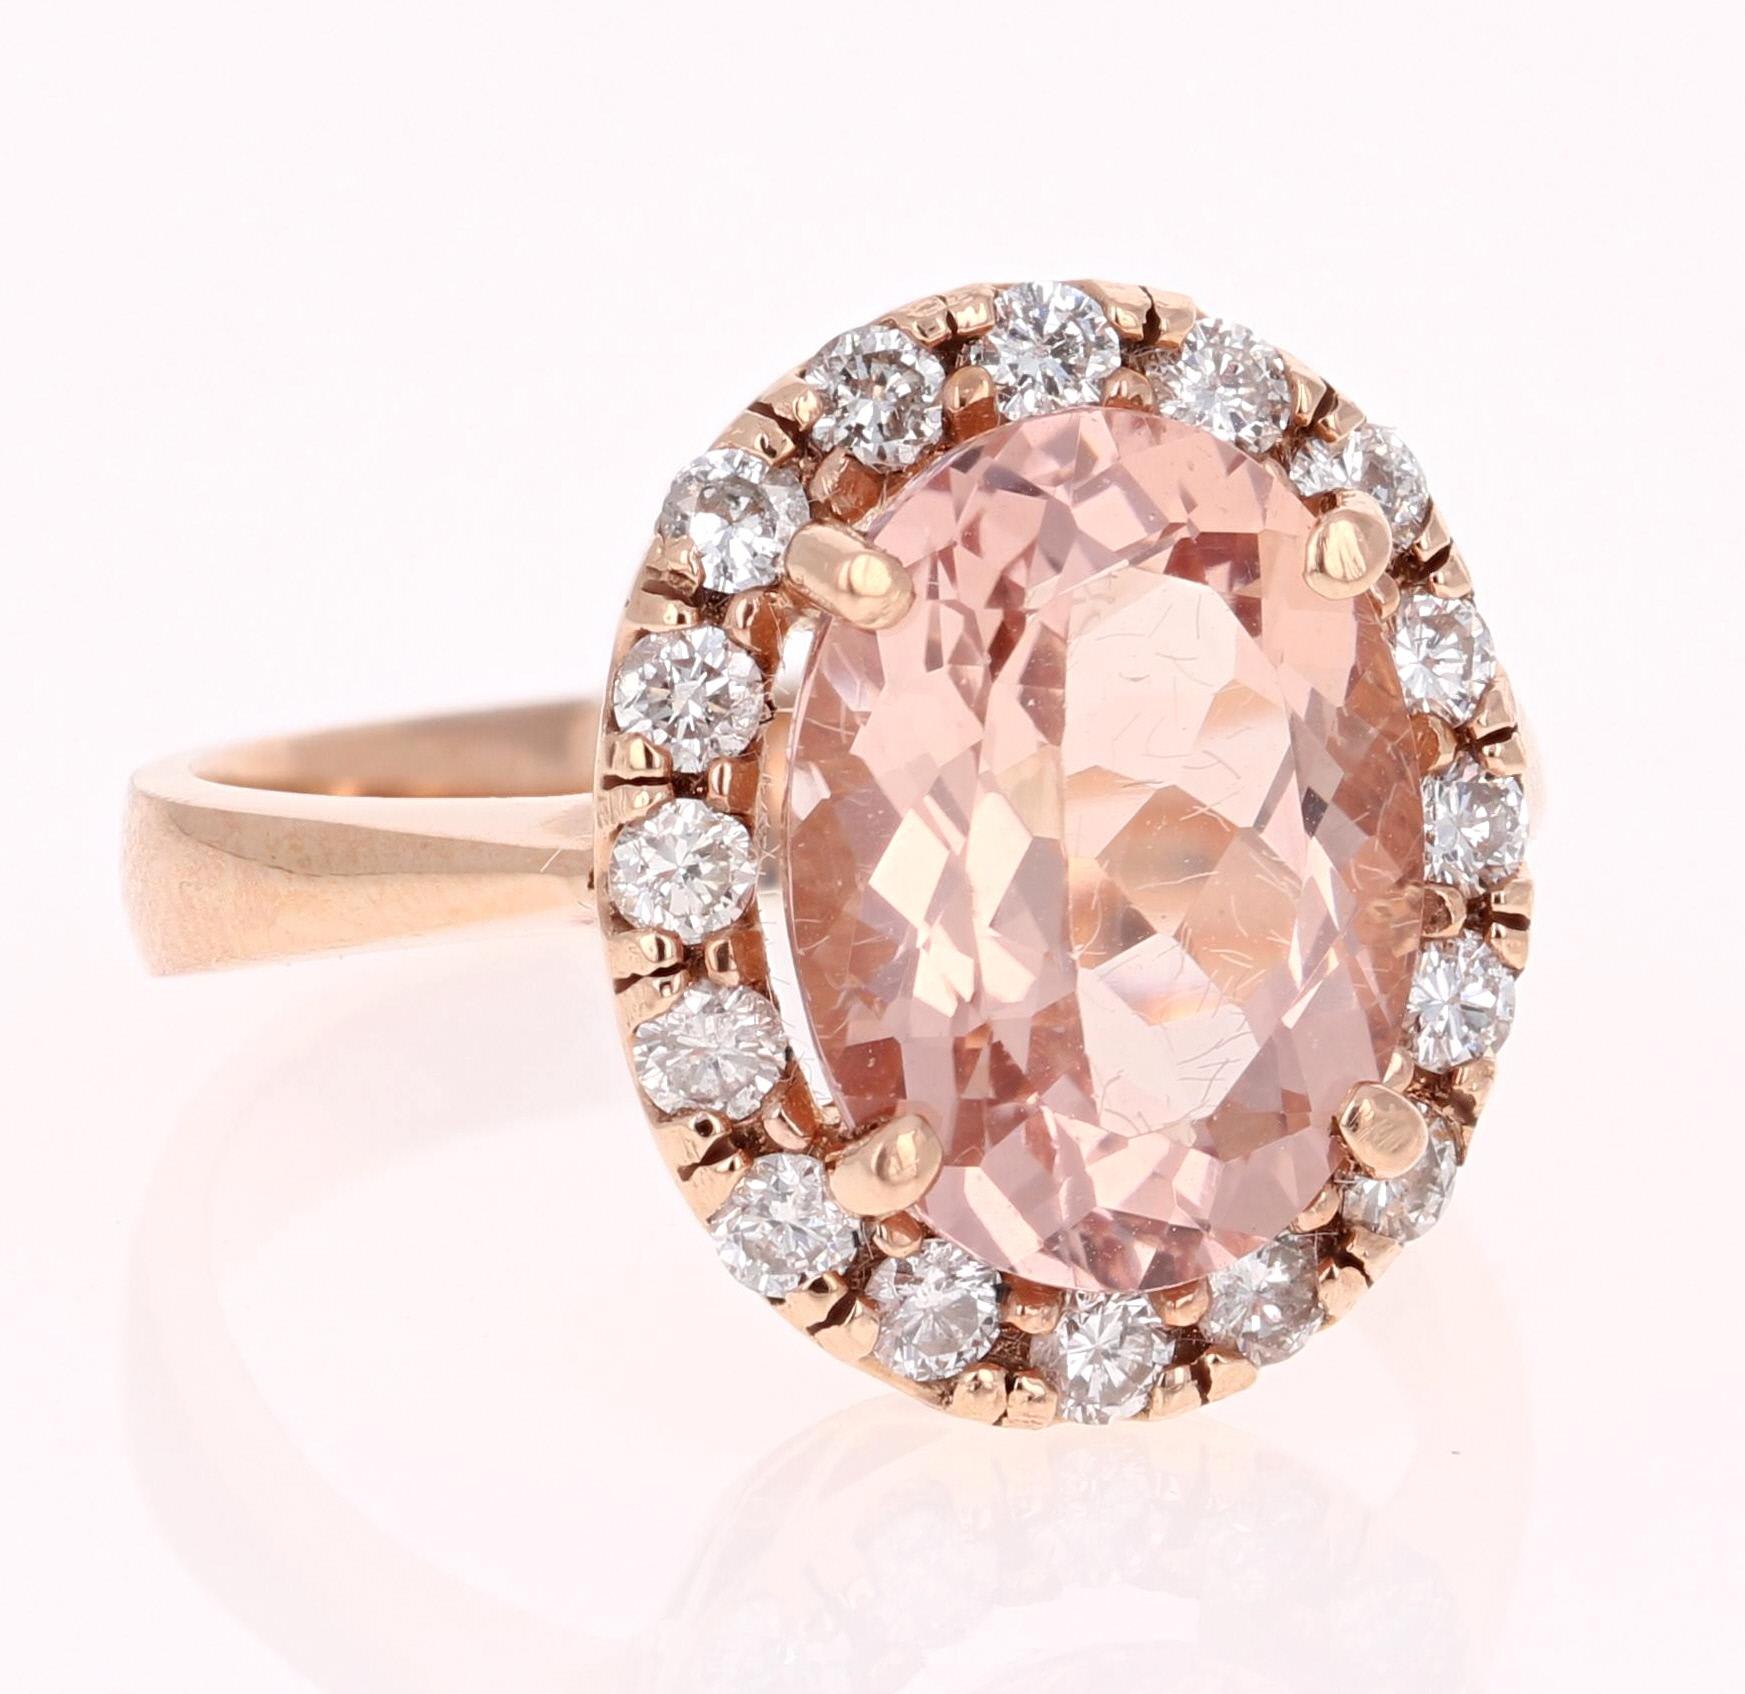 This classic Morganite Ring has an Oval Cut 4.20 Carat Morganite as its center and is surrounded by 16 Round Cut Diamonds that weigh 0.69 Carats. The clarity and color of the diamonds are SI2-F. The total carat weight of the ring is 4.89 Carats.
It